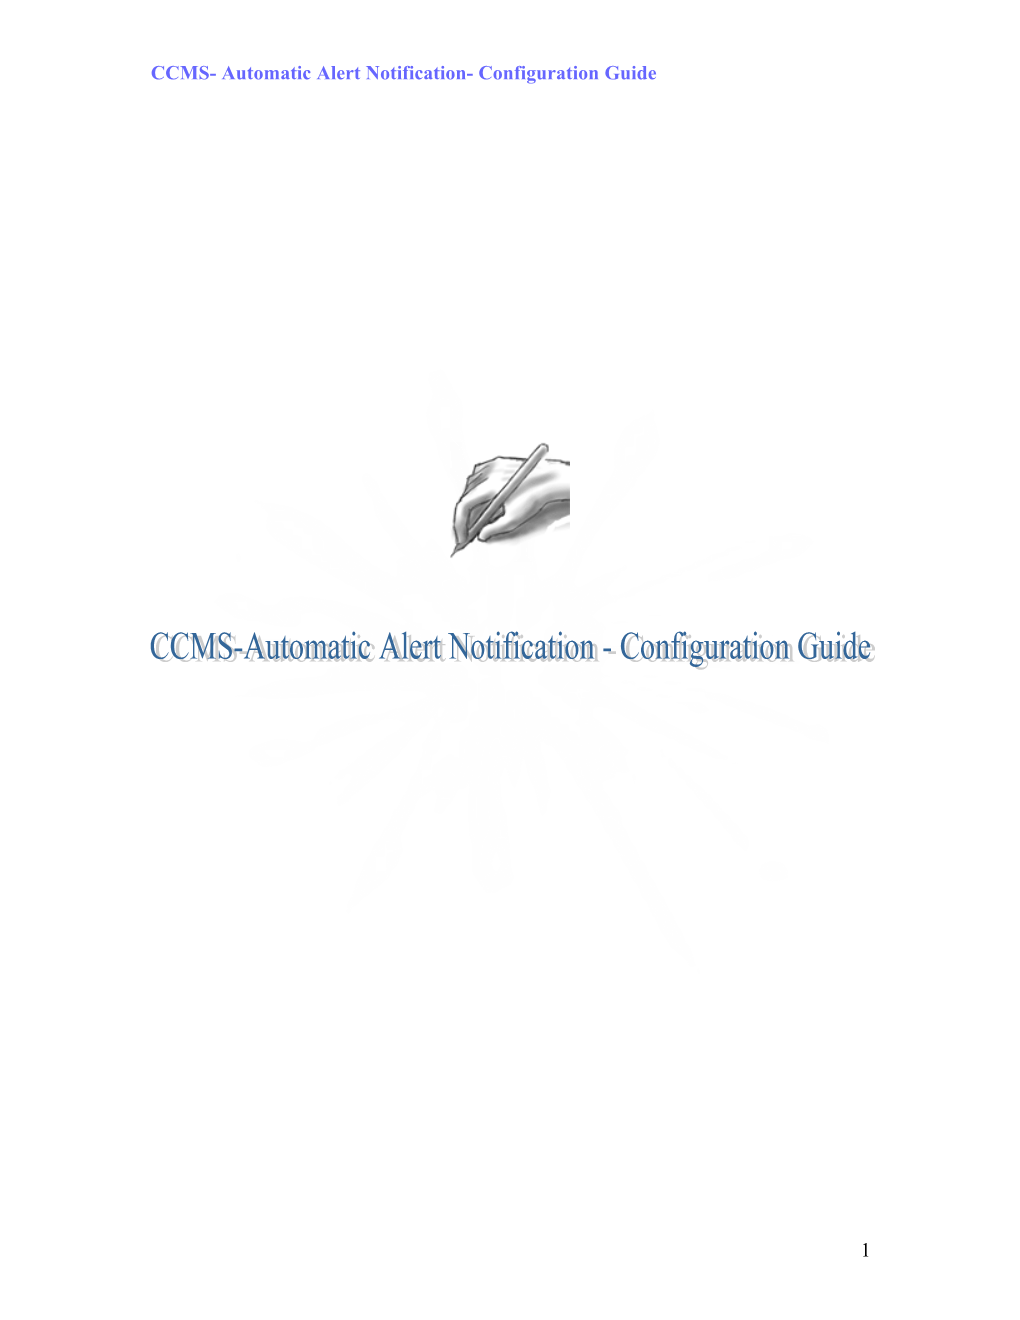 CCMS Alert Configuration Step-By-Step